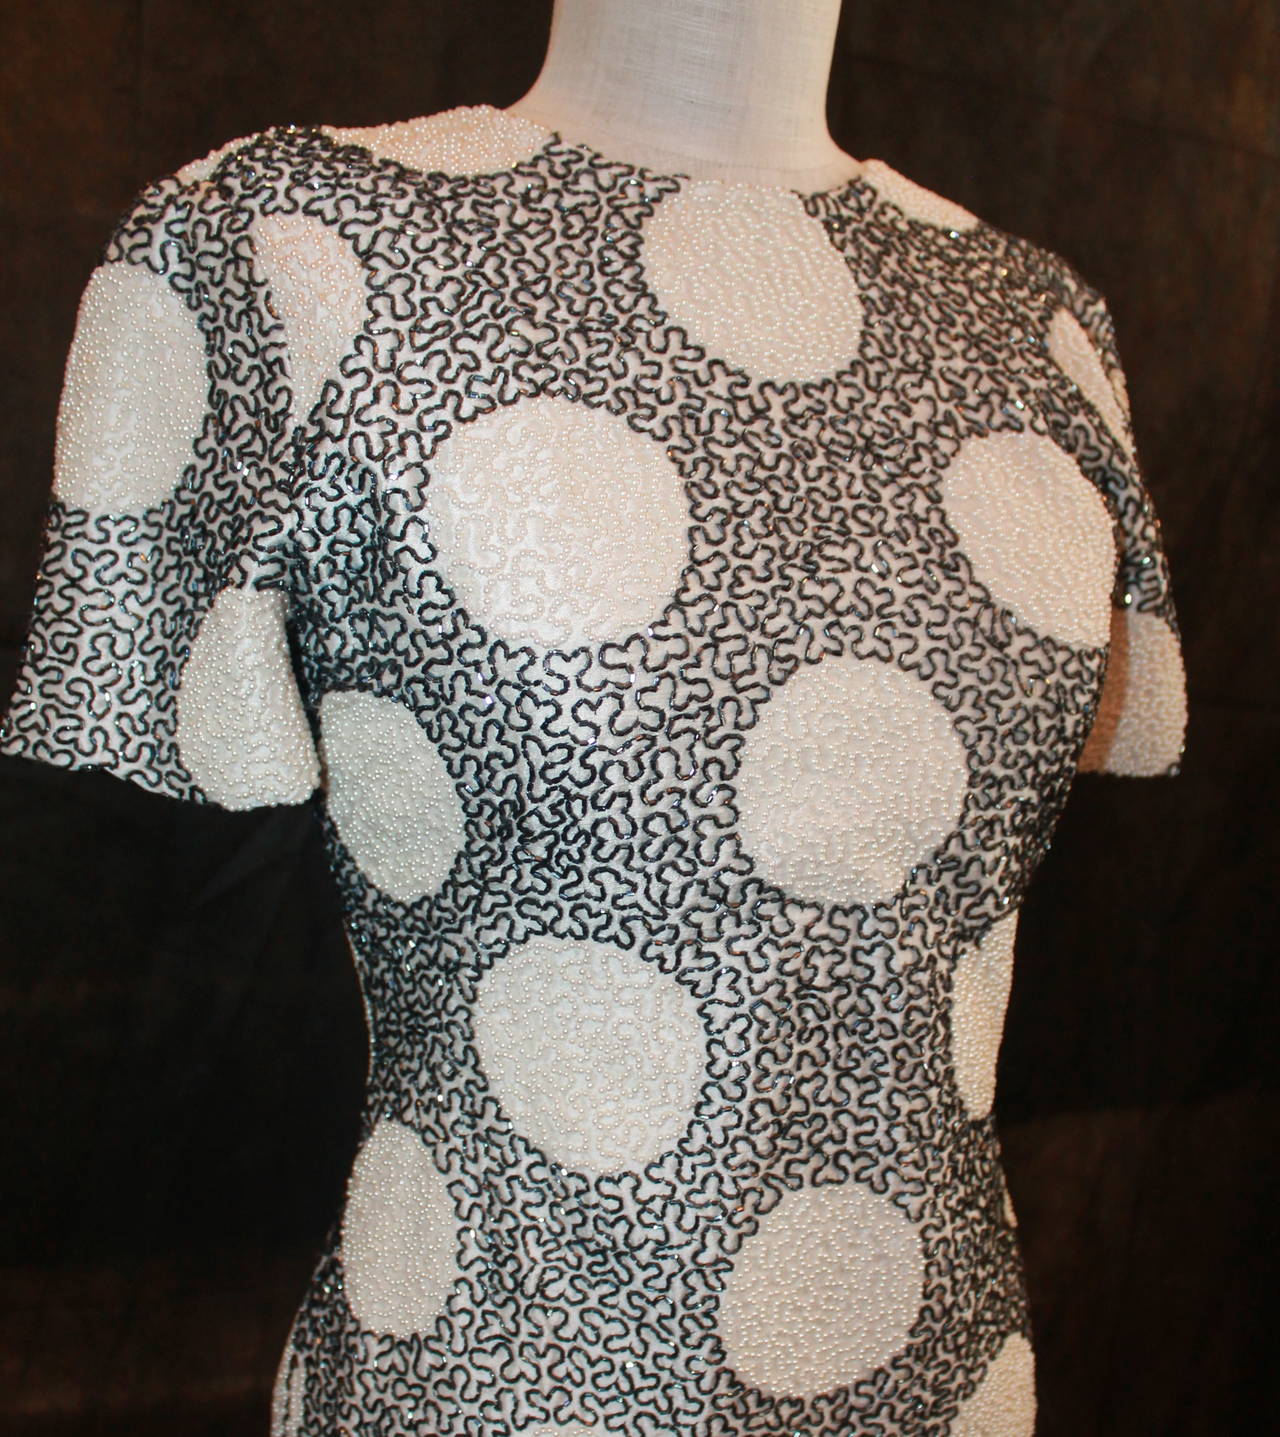 Carolina Herrera Vintage Pearl & Bead Polka Dot Dress - S. This dress is in very good vintage condition with minor pulls on the beading. 

Measurements:
Bust- 32